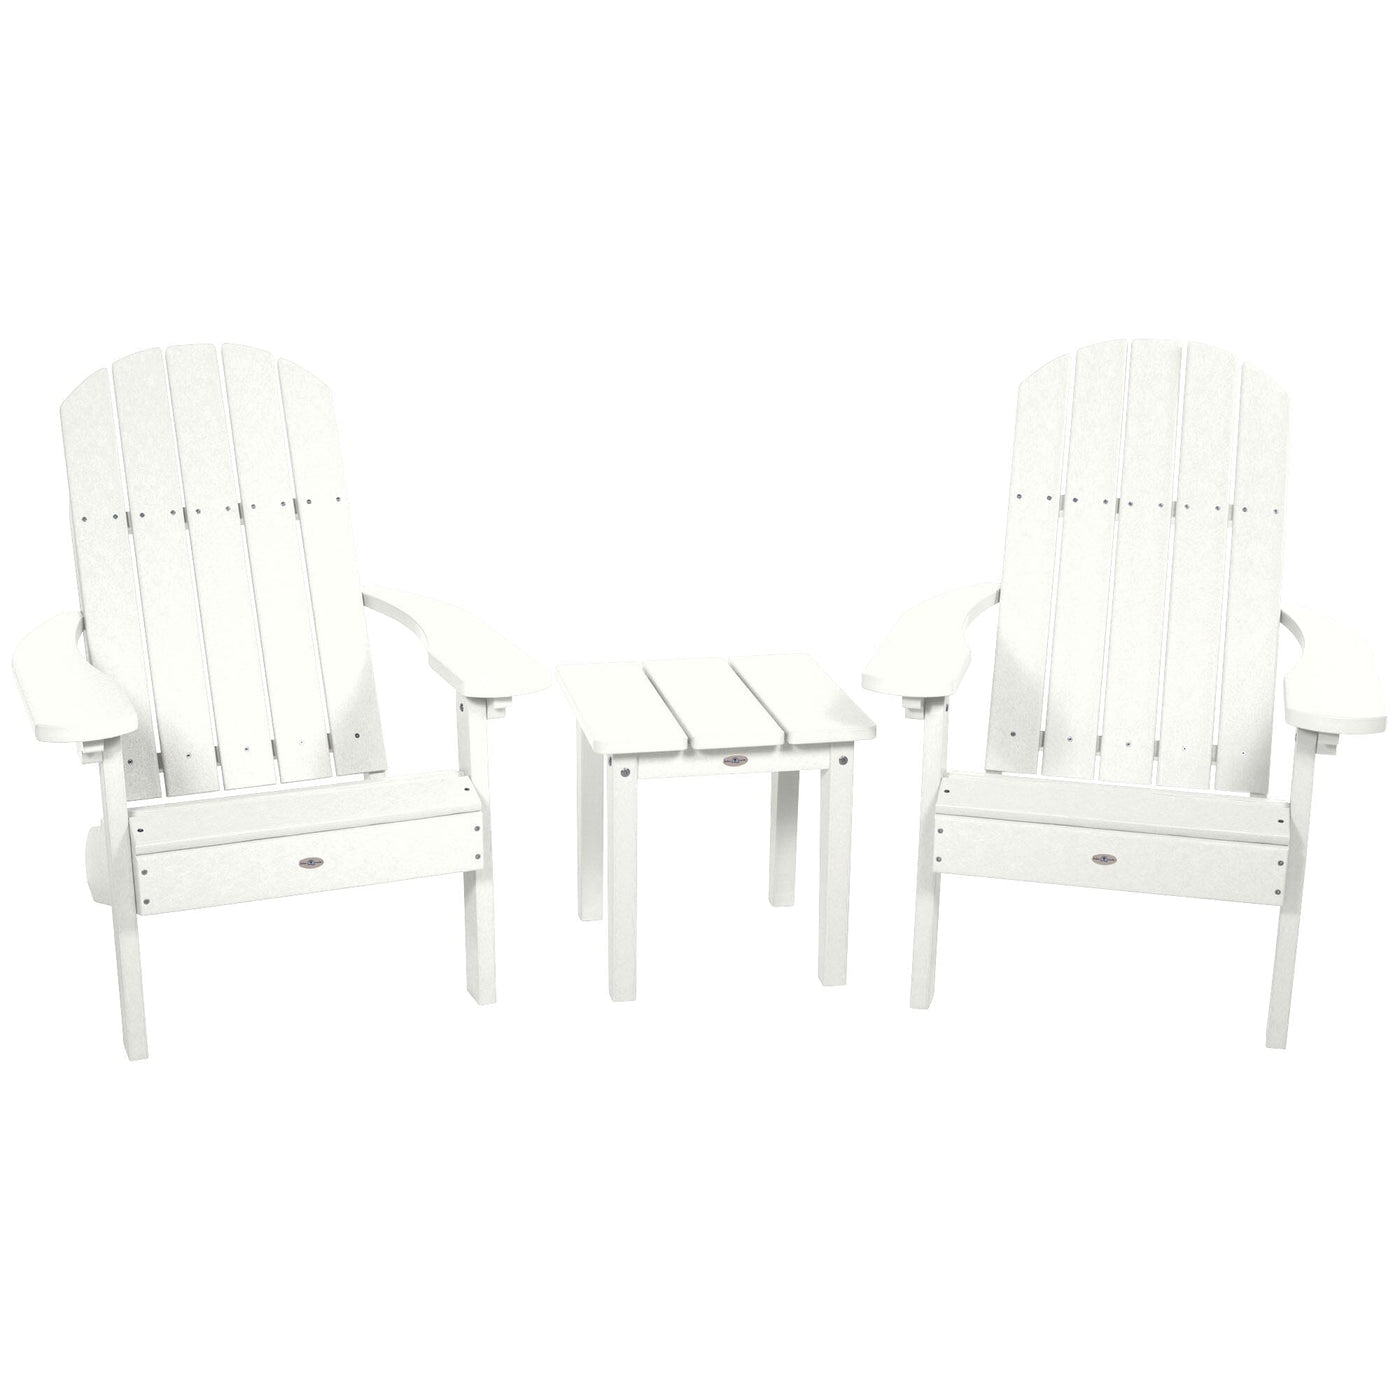 Two Cape Classic Adirondack Chairs and Side Table Set Kitted Set Bahia Verde Outdoors Coconut White 